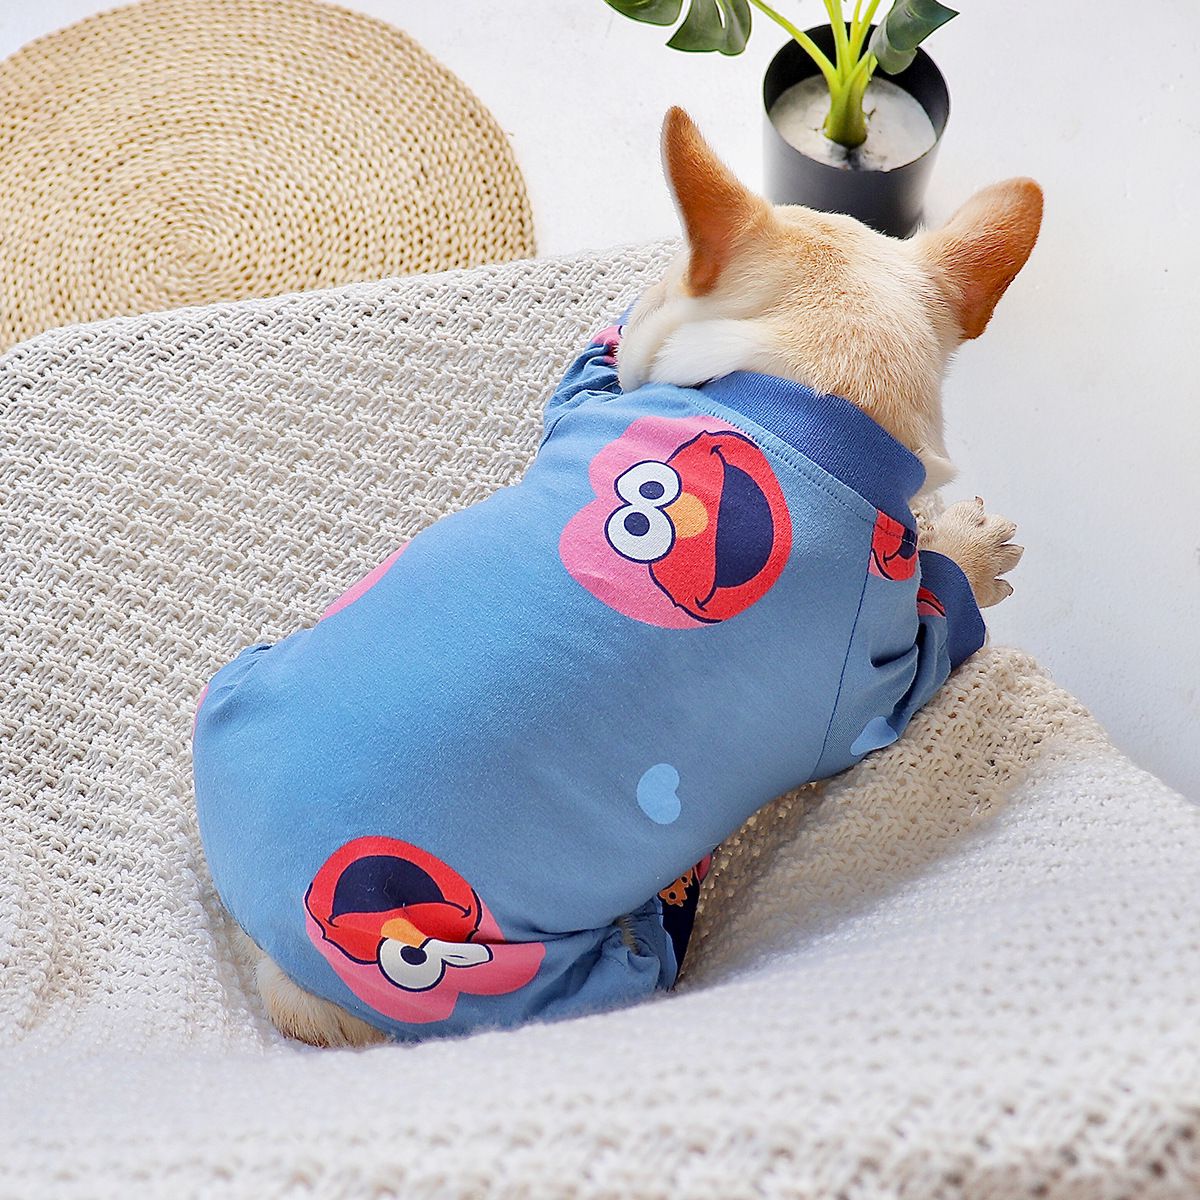 Dog Cookie Monster Pajamas - Frenchiely